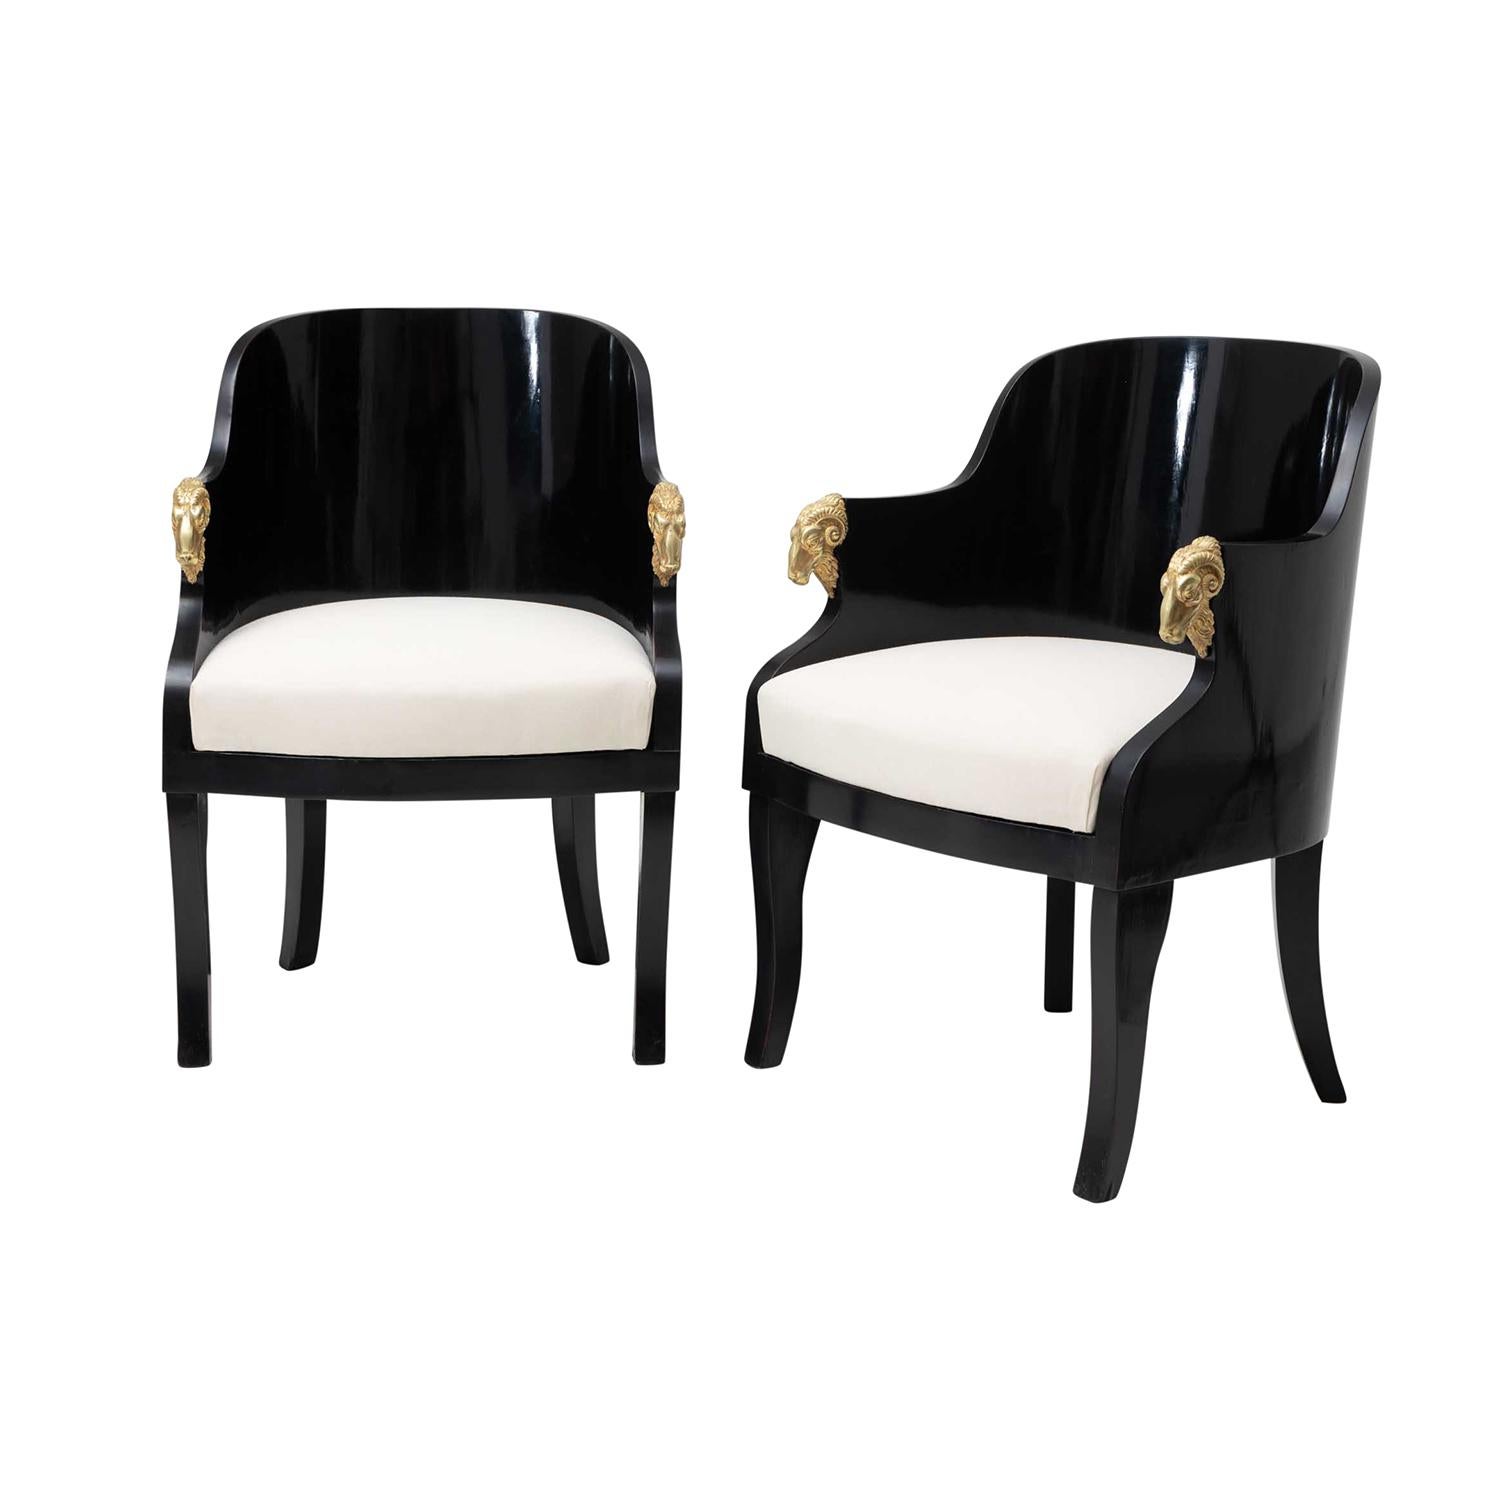 Hand-Carved 19th Century Black Baltic Pair of Lacquered Birch Armchairs, Antique Side Chairs For Sale